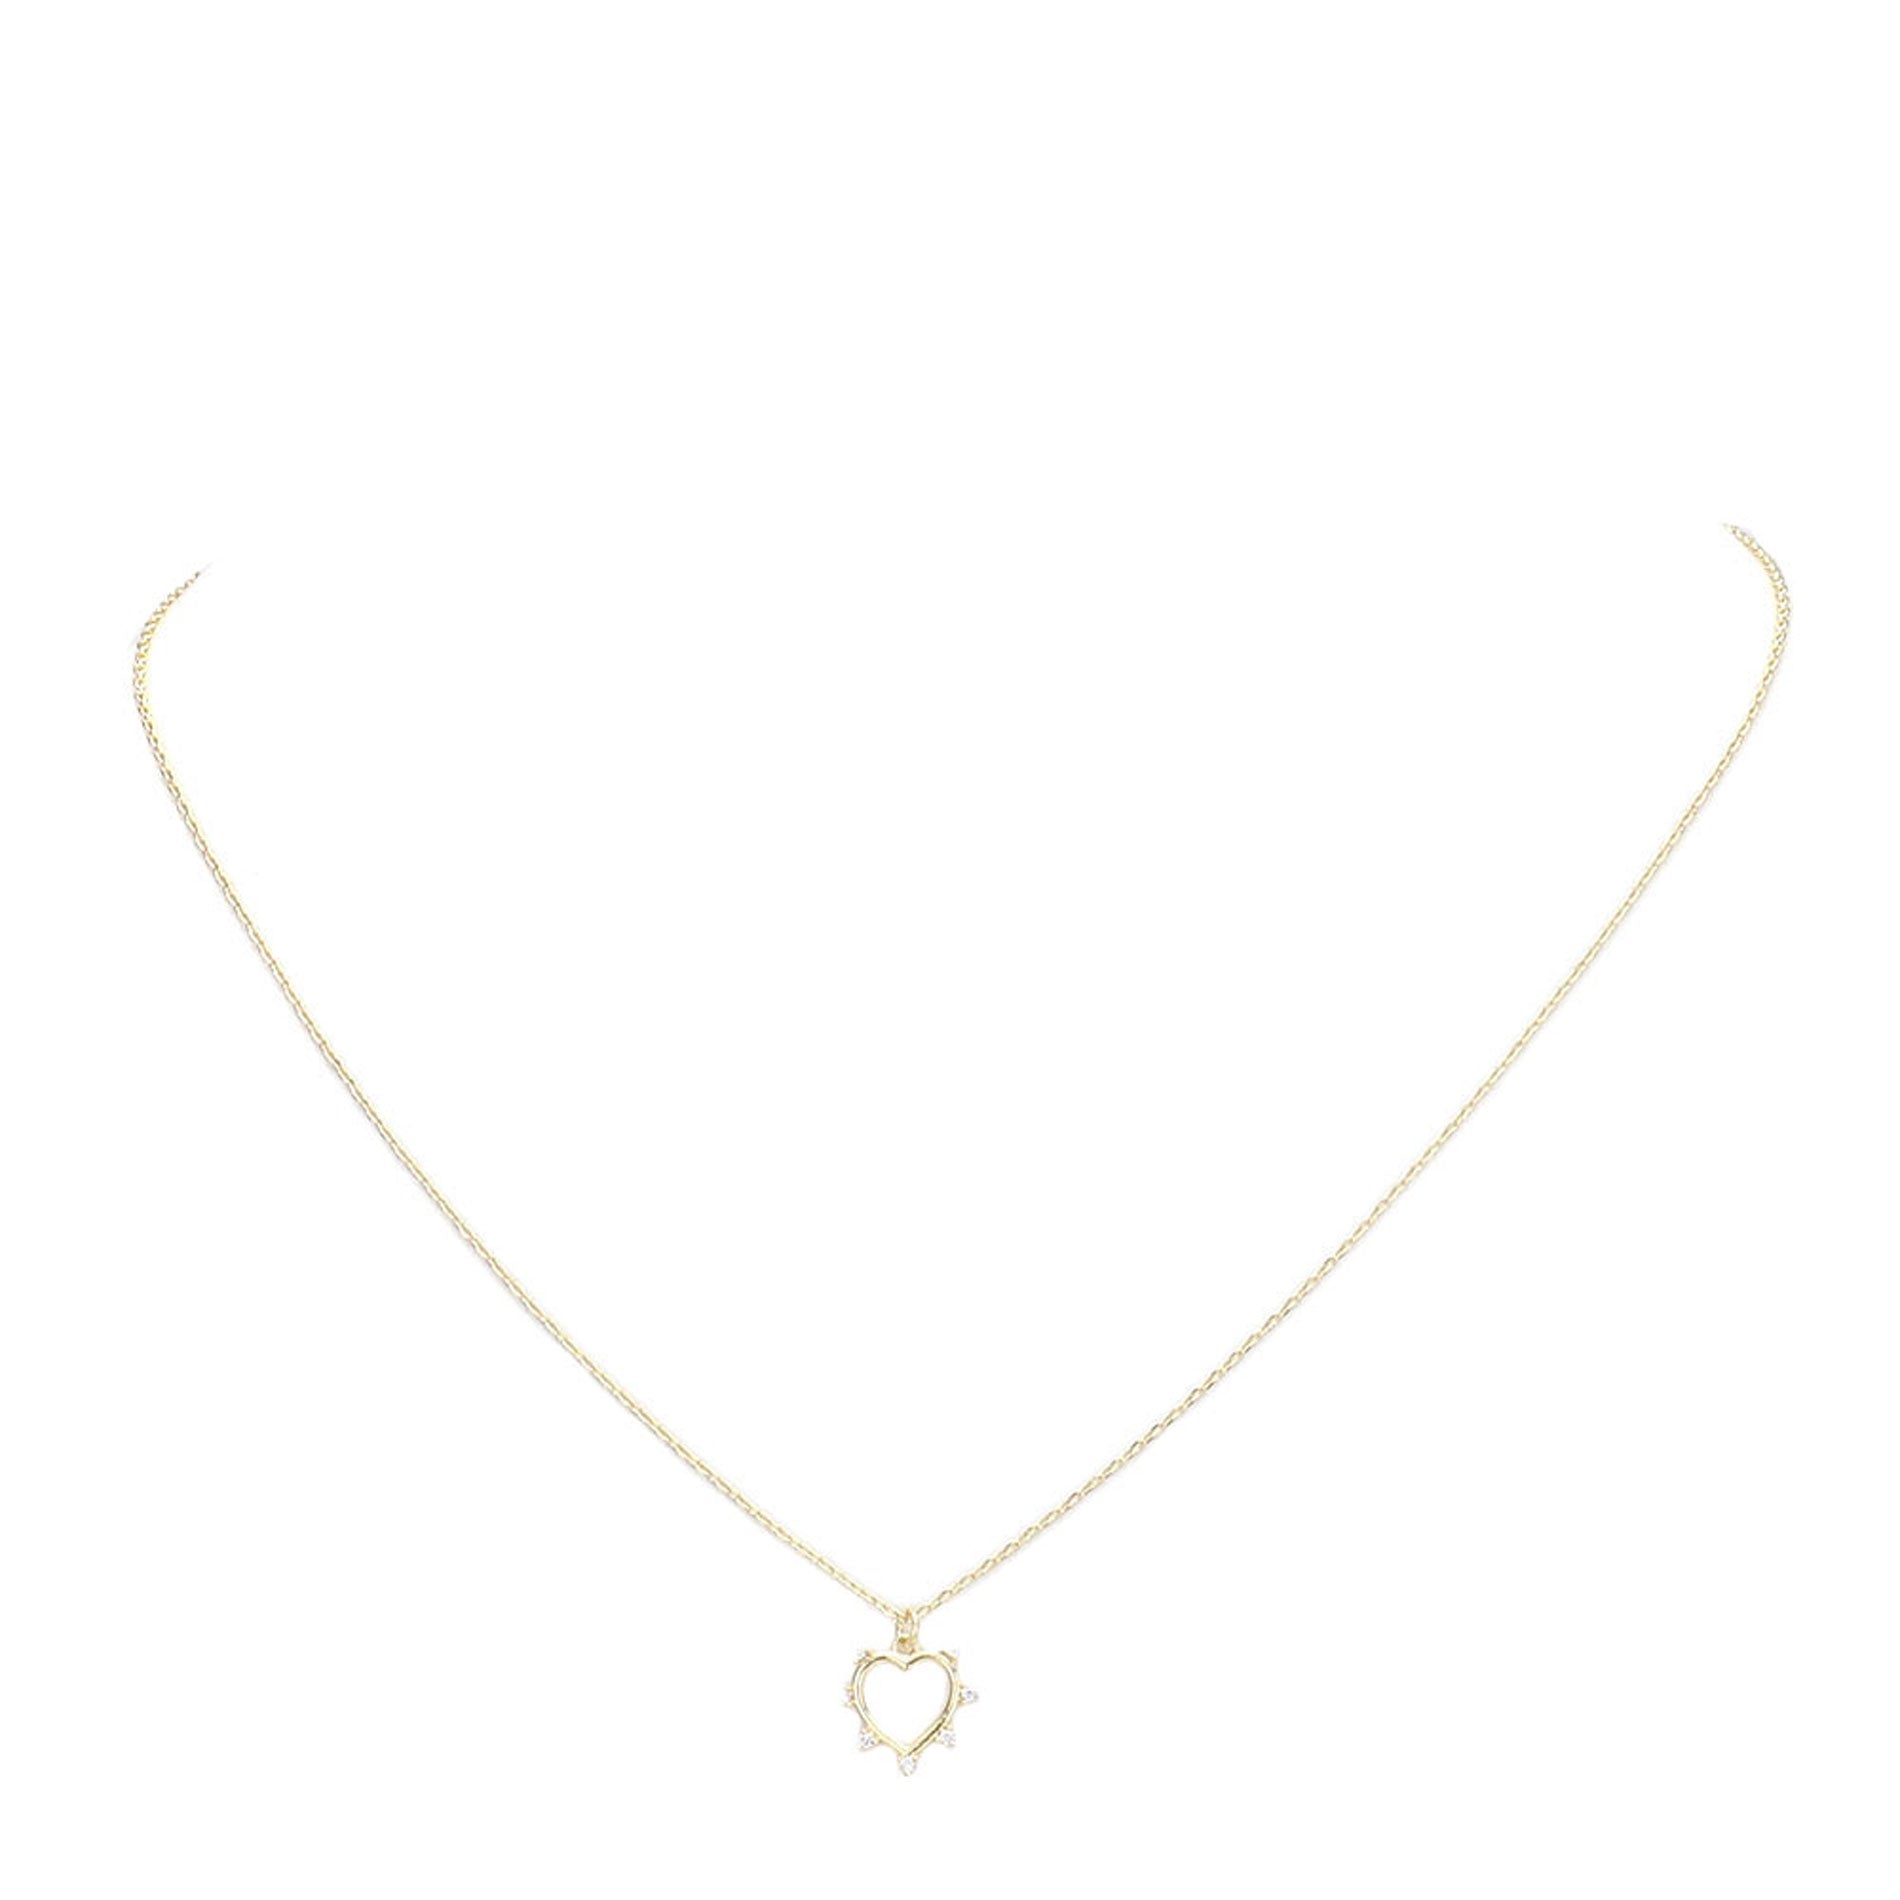 Gold Stone Trim Brass Metal Open Heart Pendant Necklace, Get ready with these Pendant Necklace, put on a pop of color to complete your ensemble. Perfect for adding just the right amount of shimmer & shine and a touch of class to special events. Perfect Birthday Gift, Anniversary Gift, Mother's Day Gift, Valentine's Day Gift.